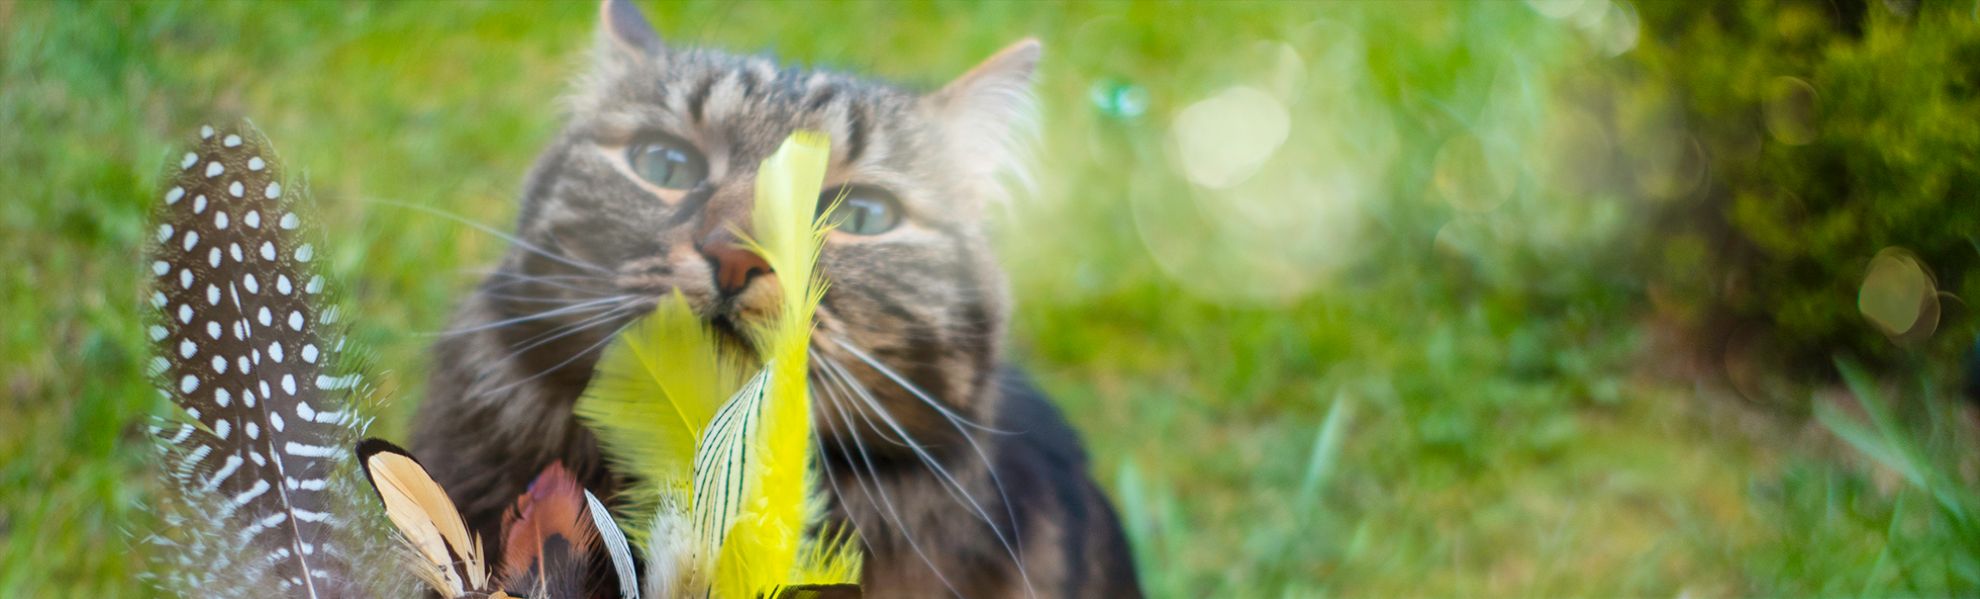 Tabby cat sniffing colorful feathers. 